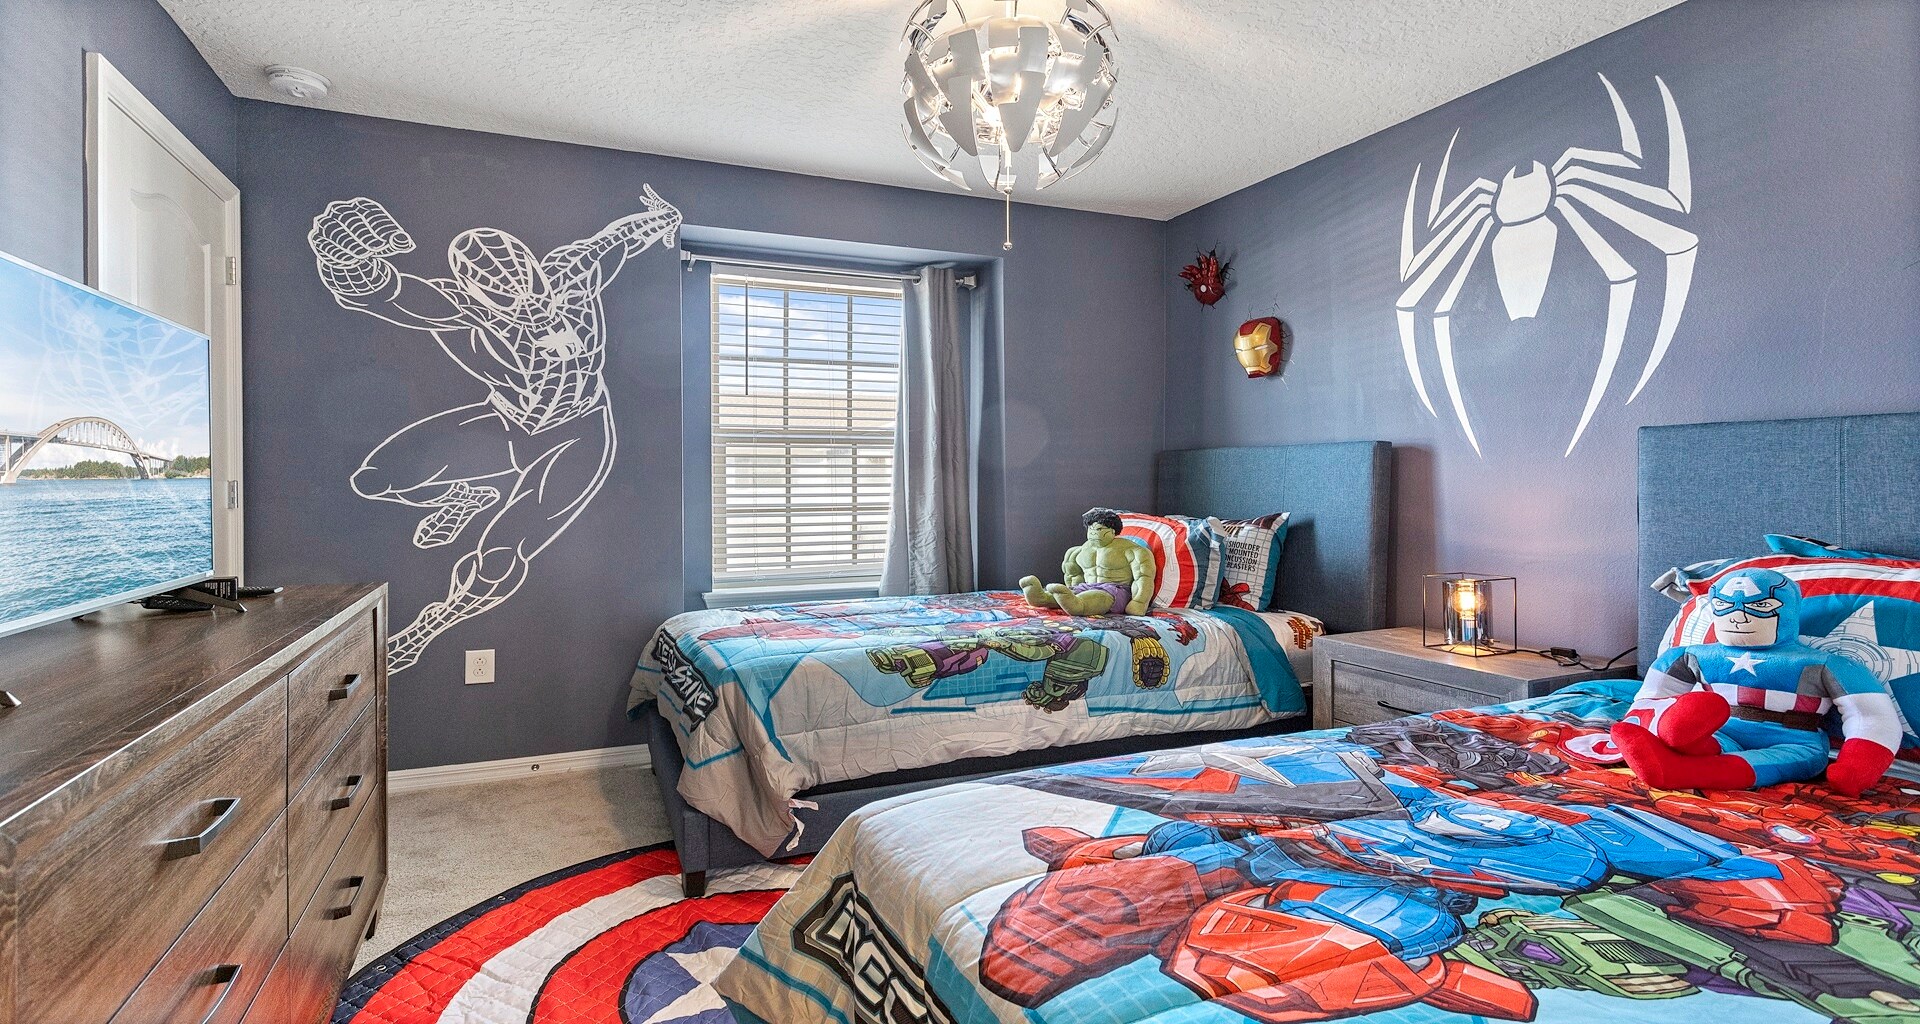 Kids will love the upstairs bedroom with a cool Spiderman theme